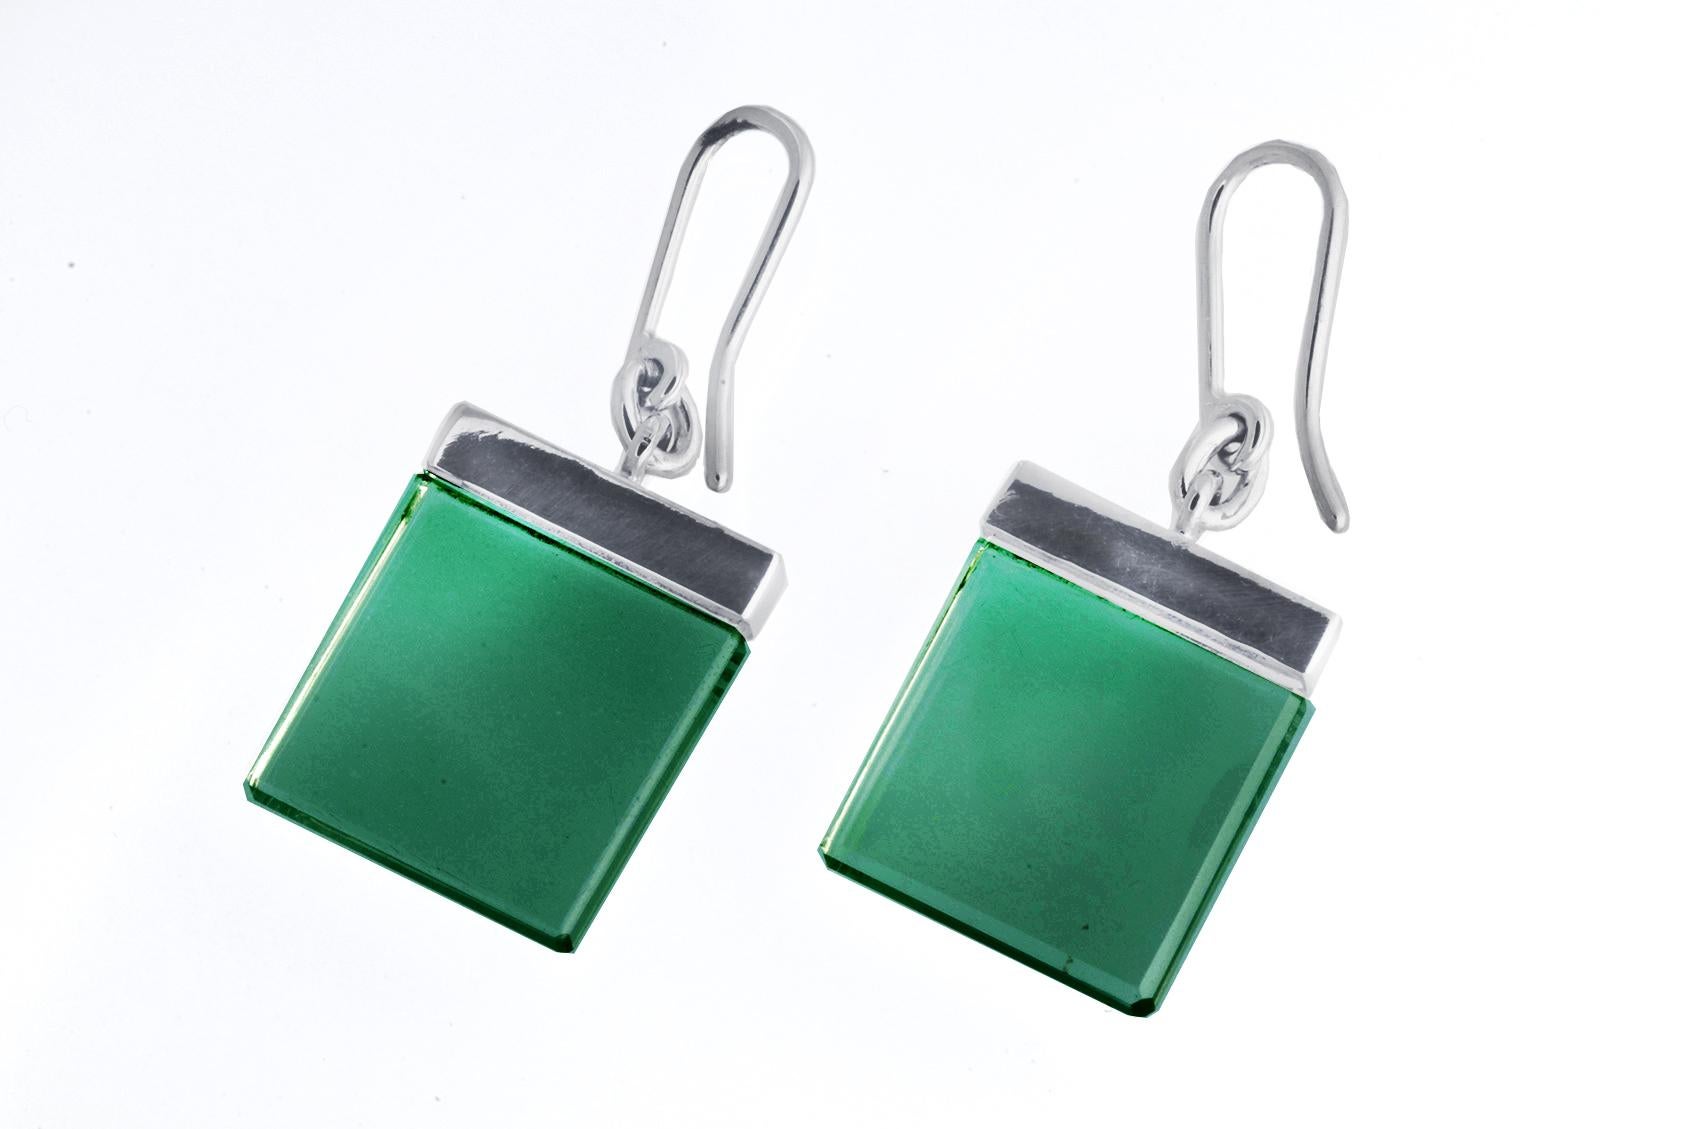 This jewellery collection, designed as sculptures by oil painter Polya Medvedeva from Berlin, was featured in Harper's Bazaar UA and Vogue UA publications.

These dangle earrings are made of sterling silver and feature vivid green grown quartzes